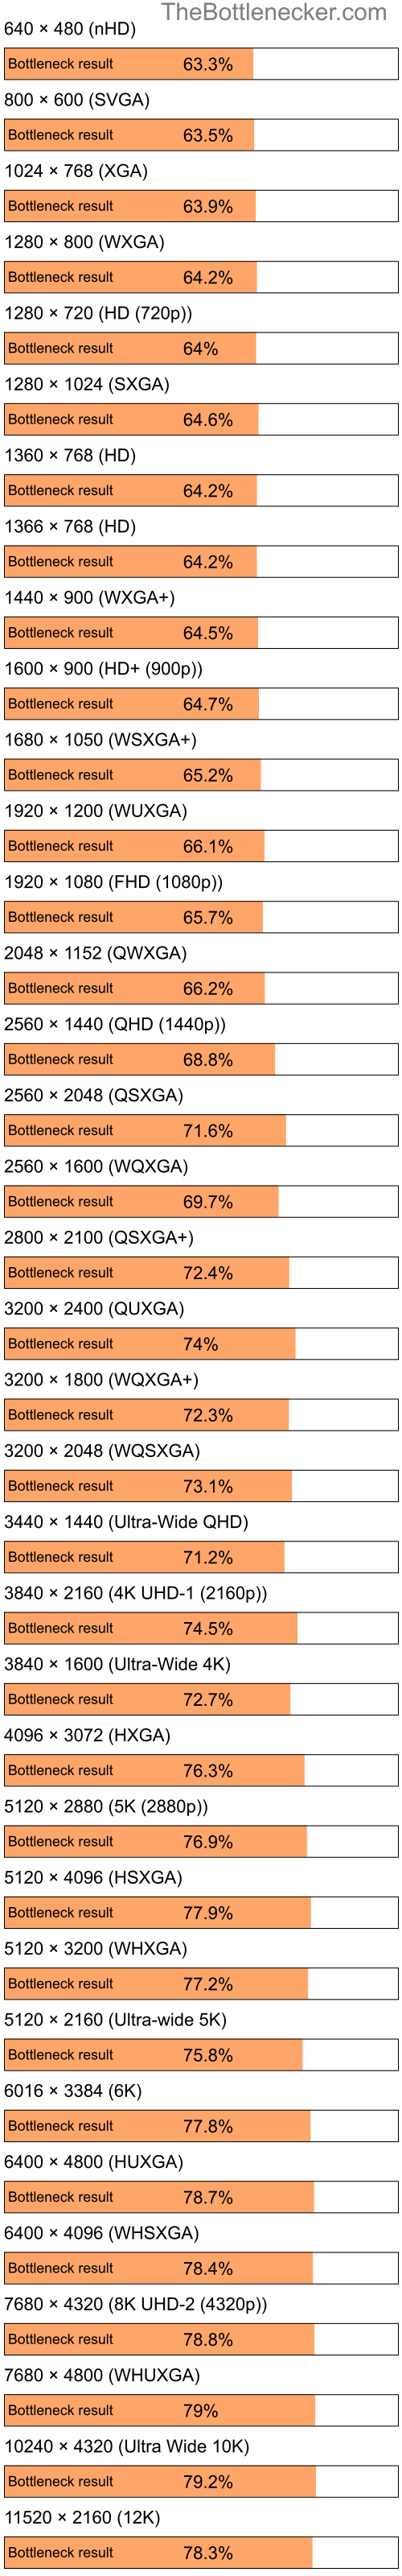 Bottleneck results by resolution for Intel Celeron M 410 and AMD Mobility Radeon HD 3450 in General Tasks